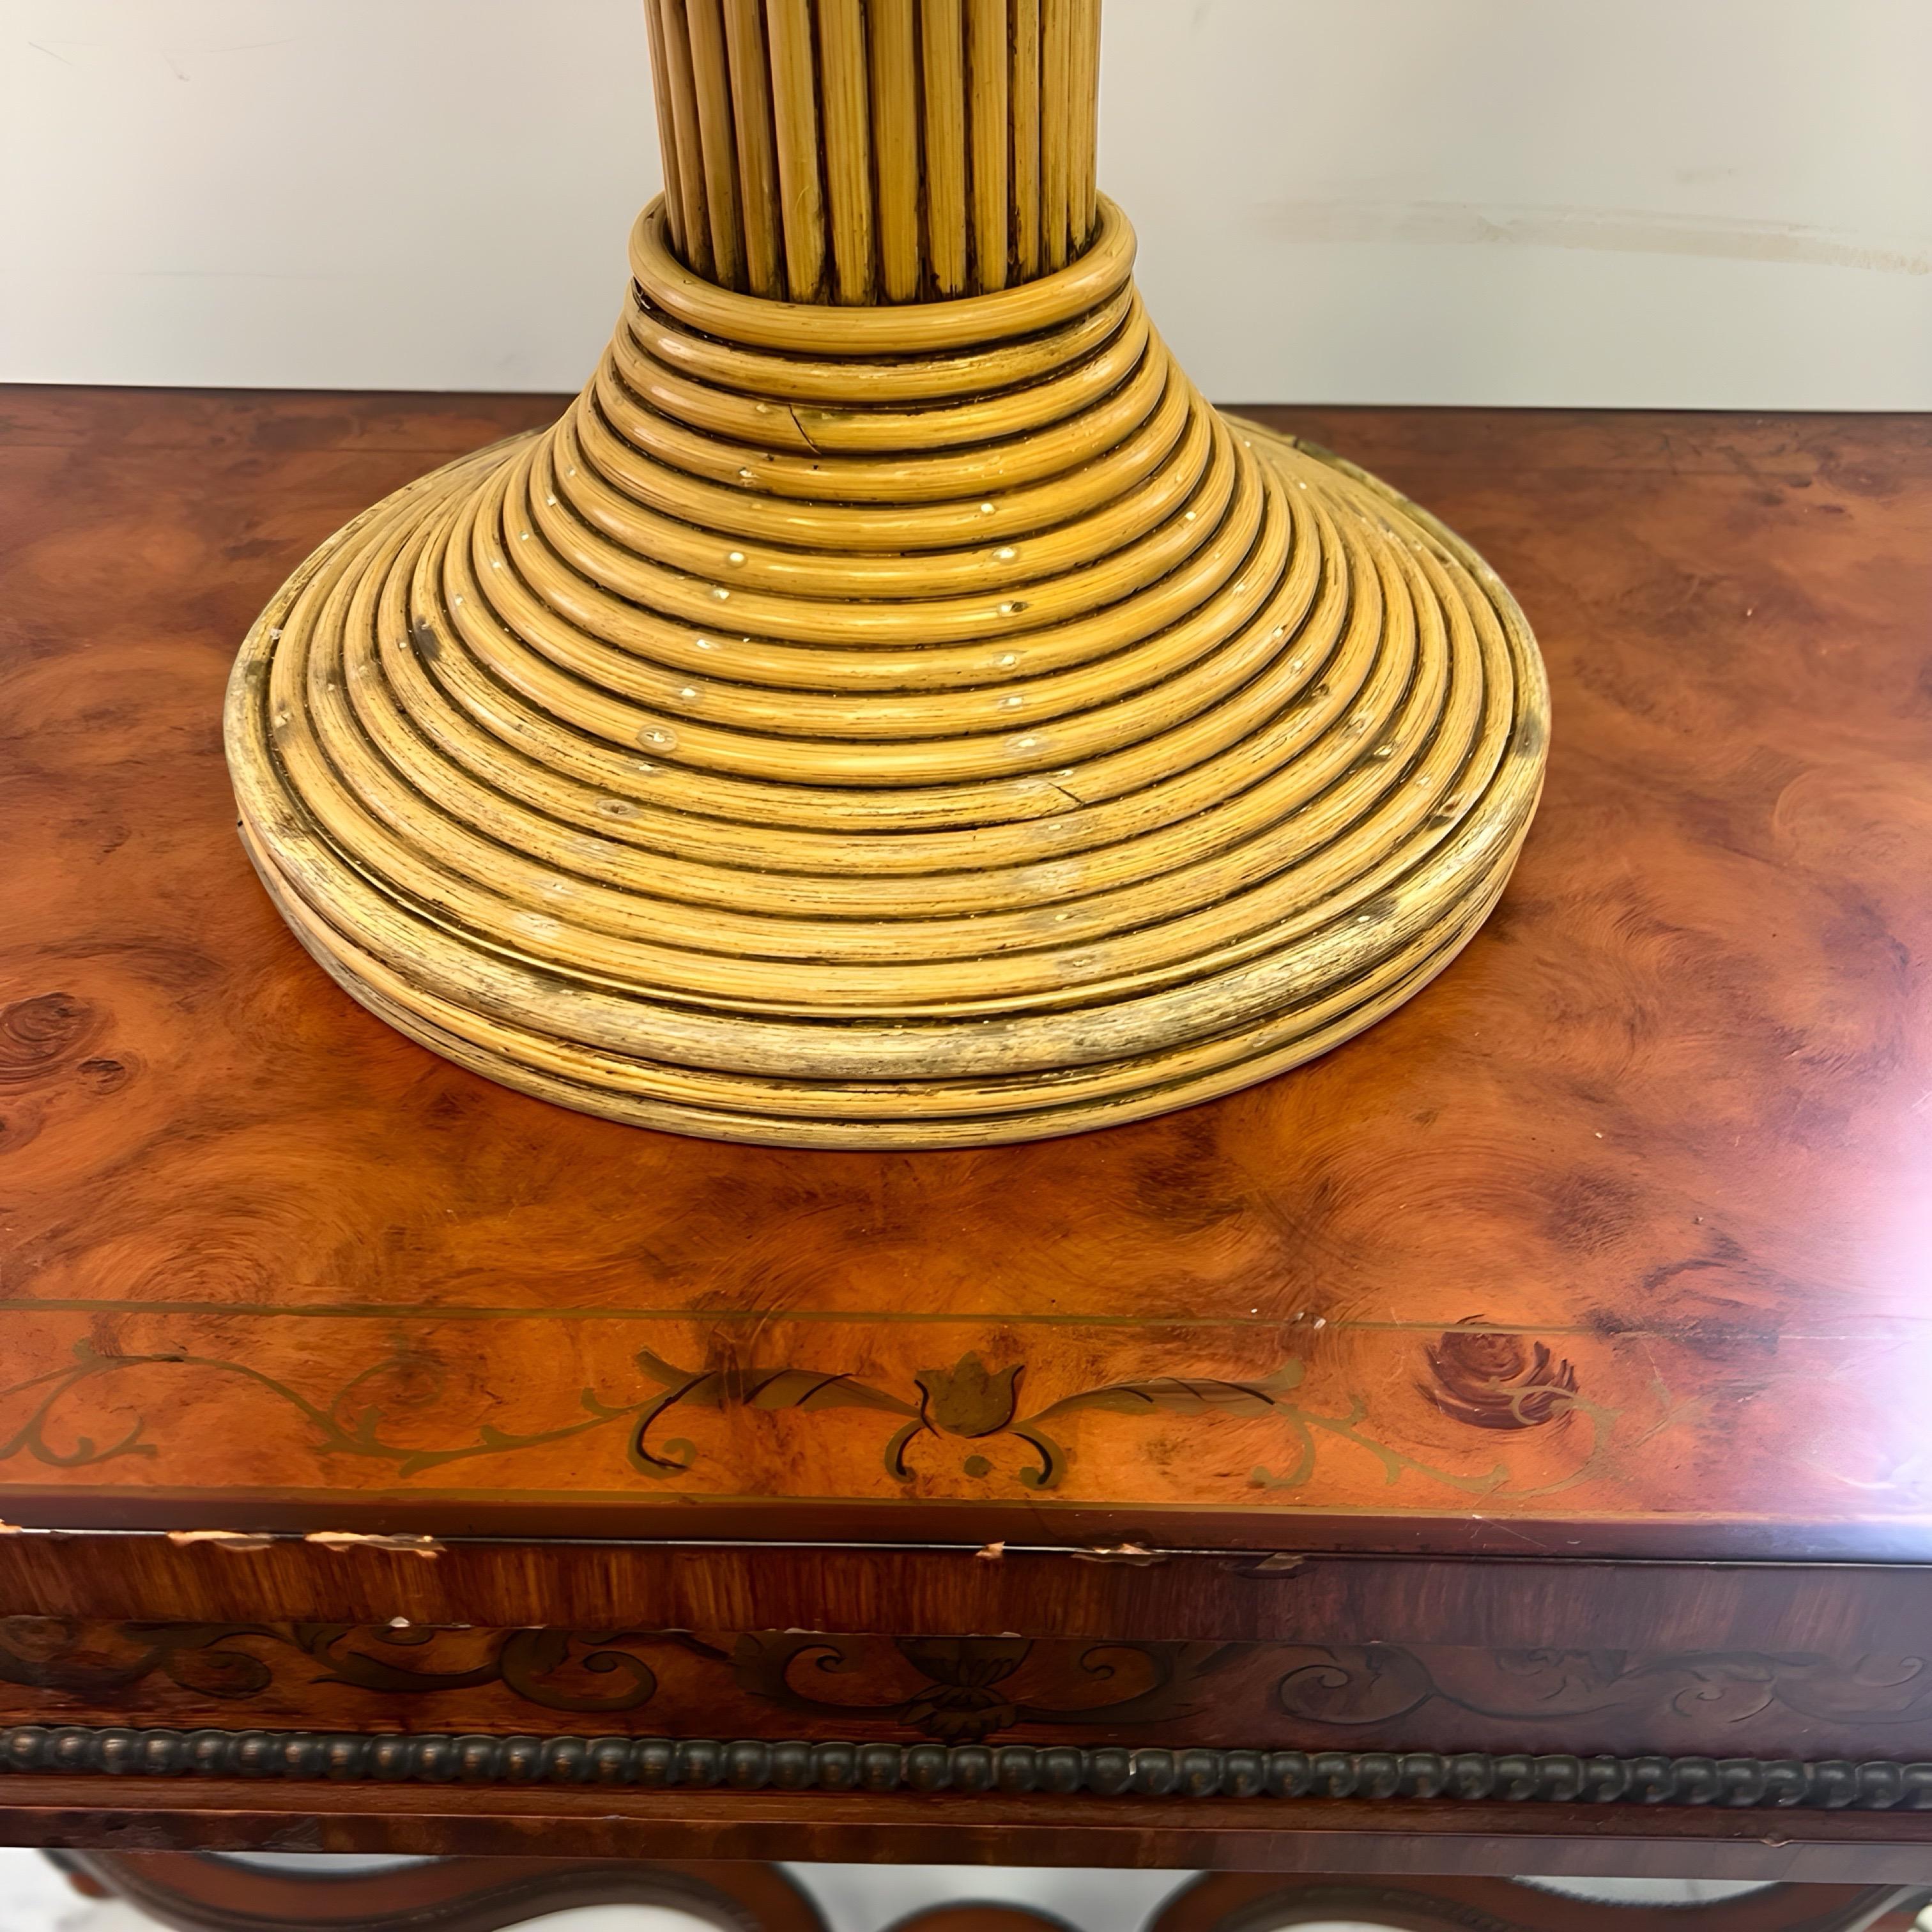 Just in, a beautiful pencil reed palm tree table lamp attributed to Mario Torres Lopez. Features removable/adjustable leaves to arrange how you like!   Would pair well with any bohemian/coastal setting. If you have any questions, please feel free to